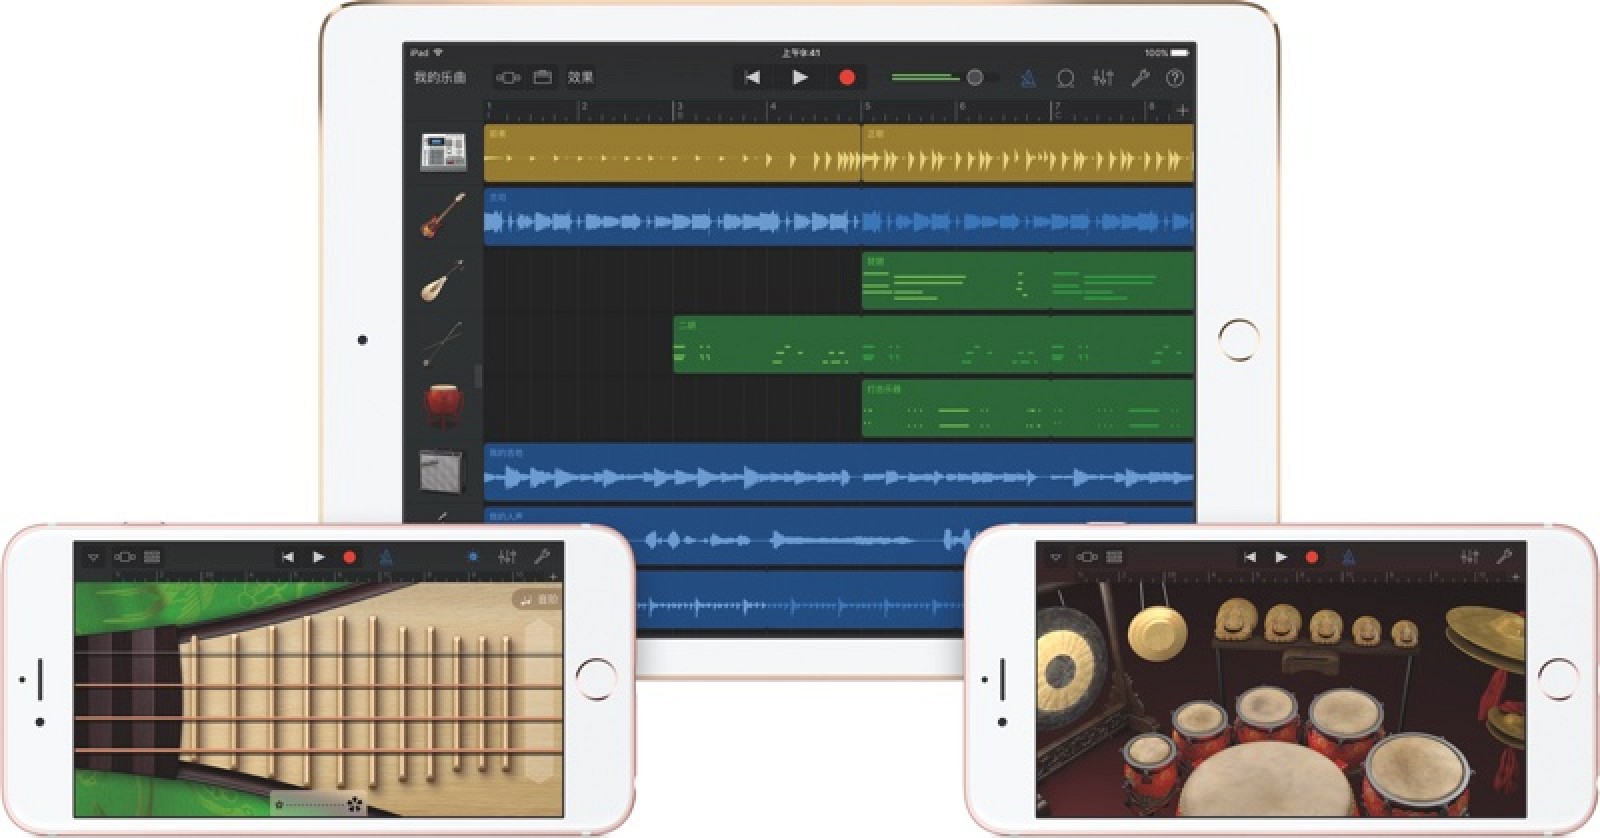 How to email someone a garageband project from ipad to iphone